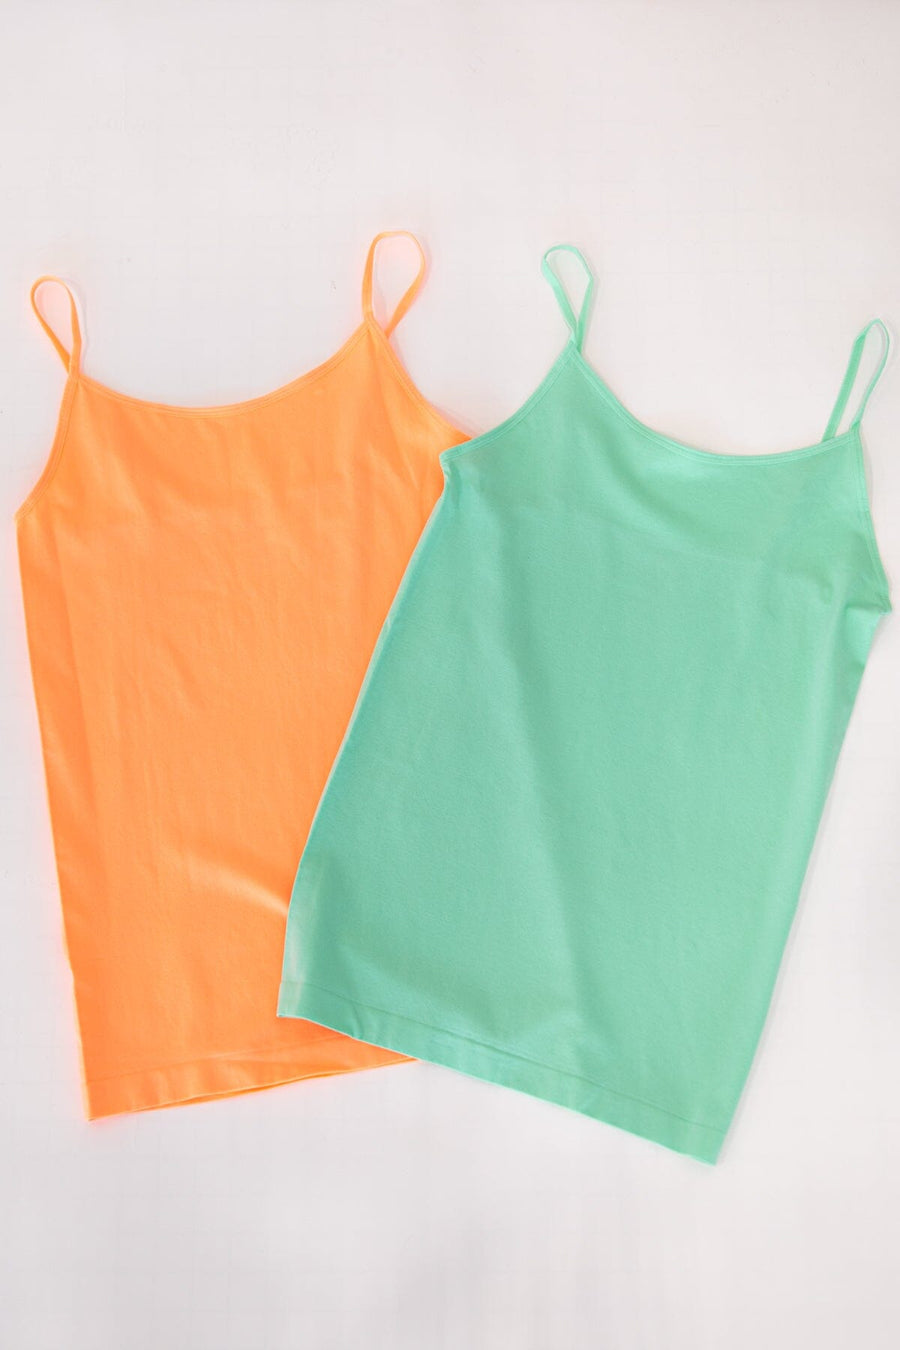 Mint and Neon Coral Seamless Tank Bundle - Filly Flair